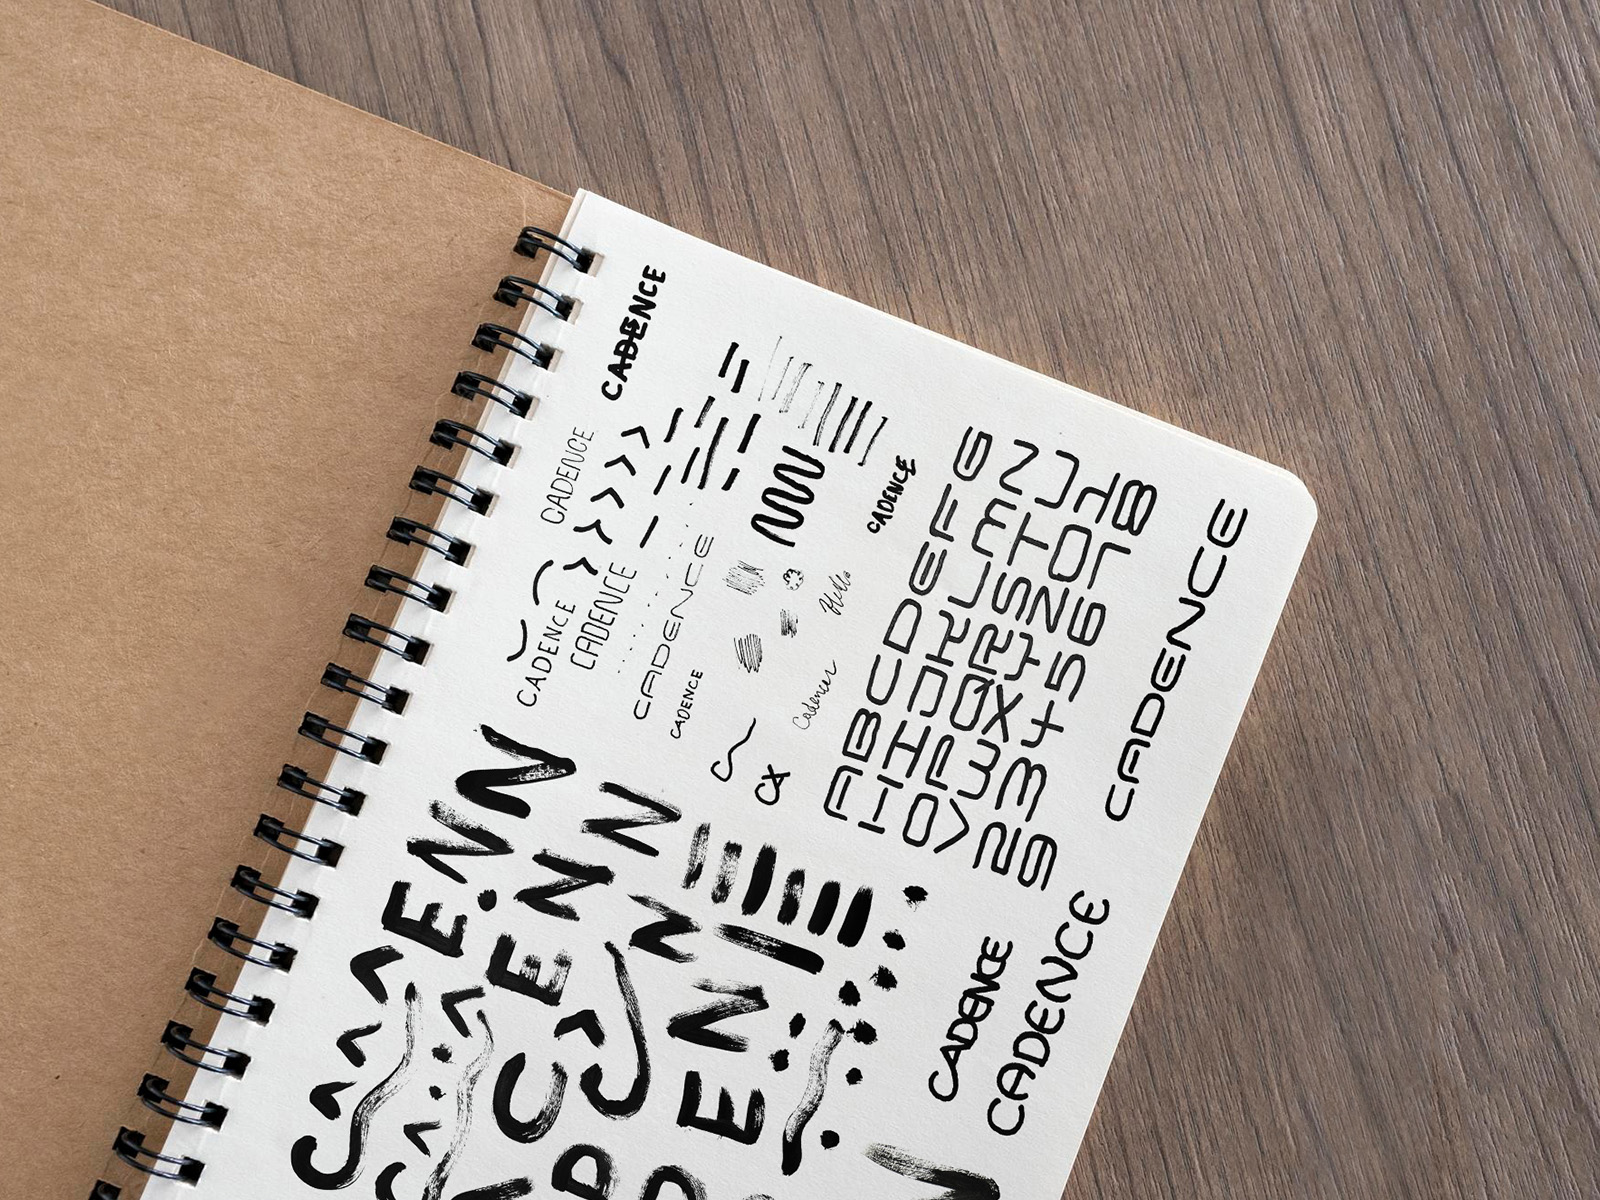 Initial typographic sketches